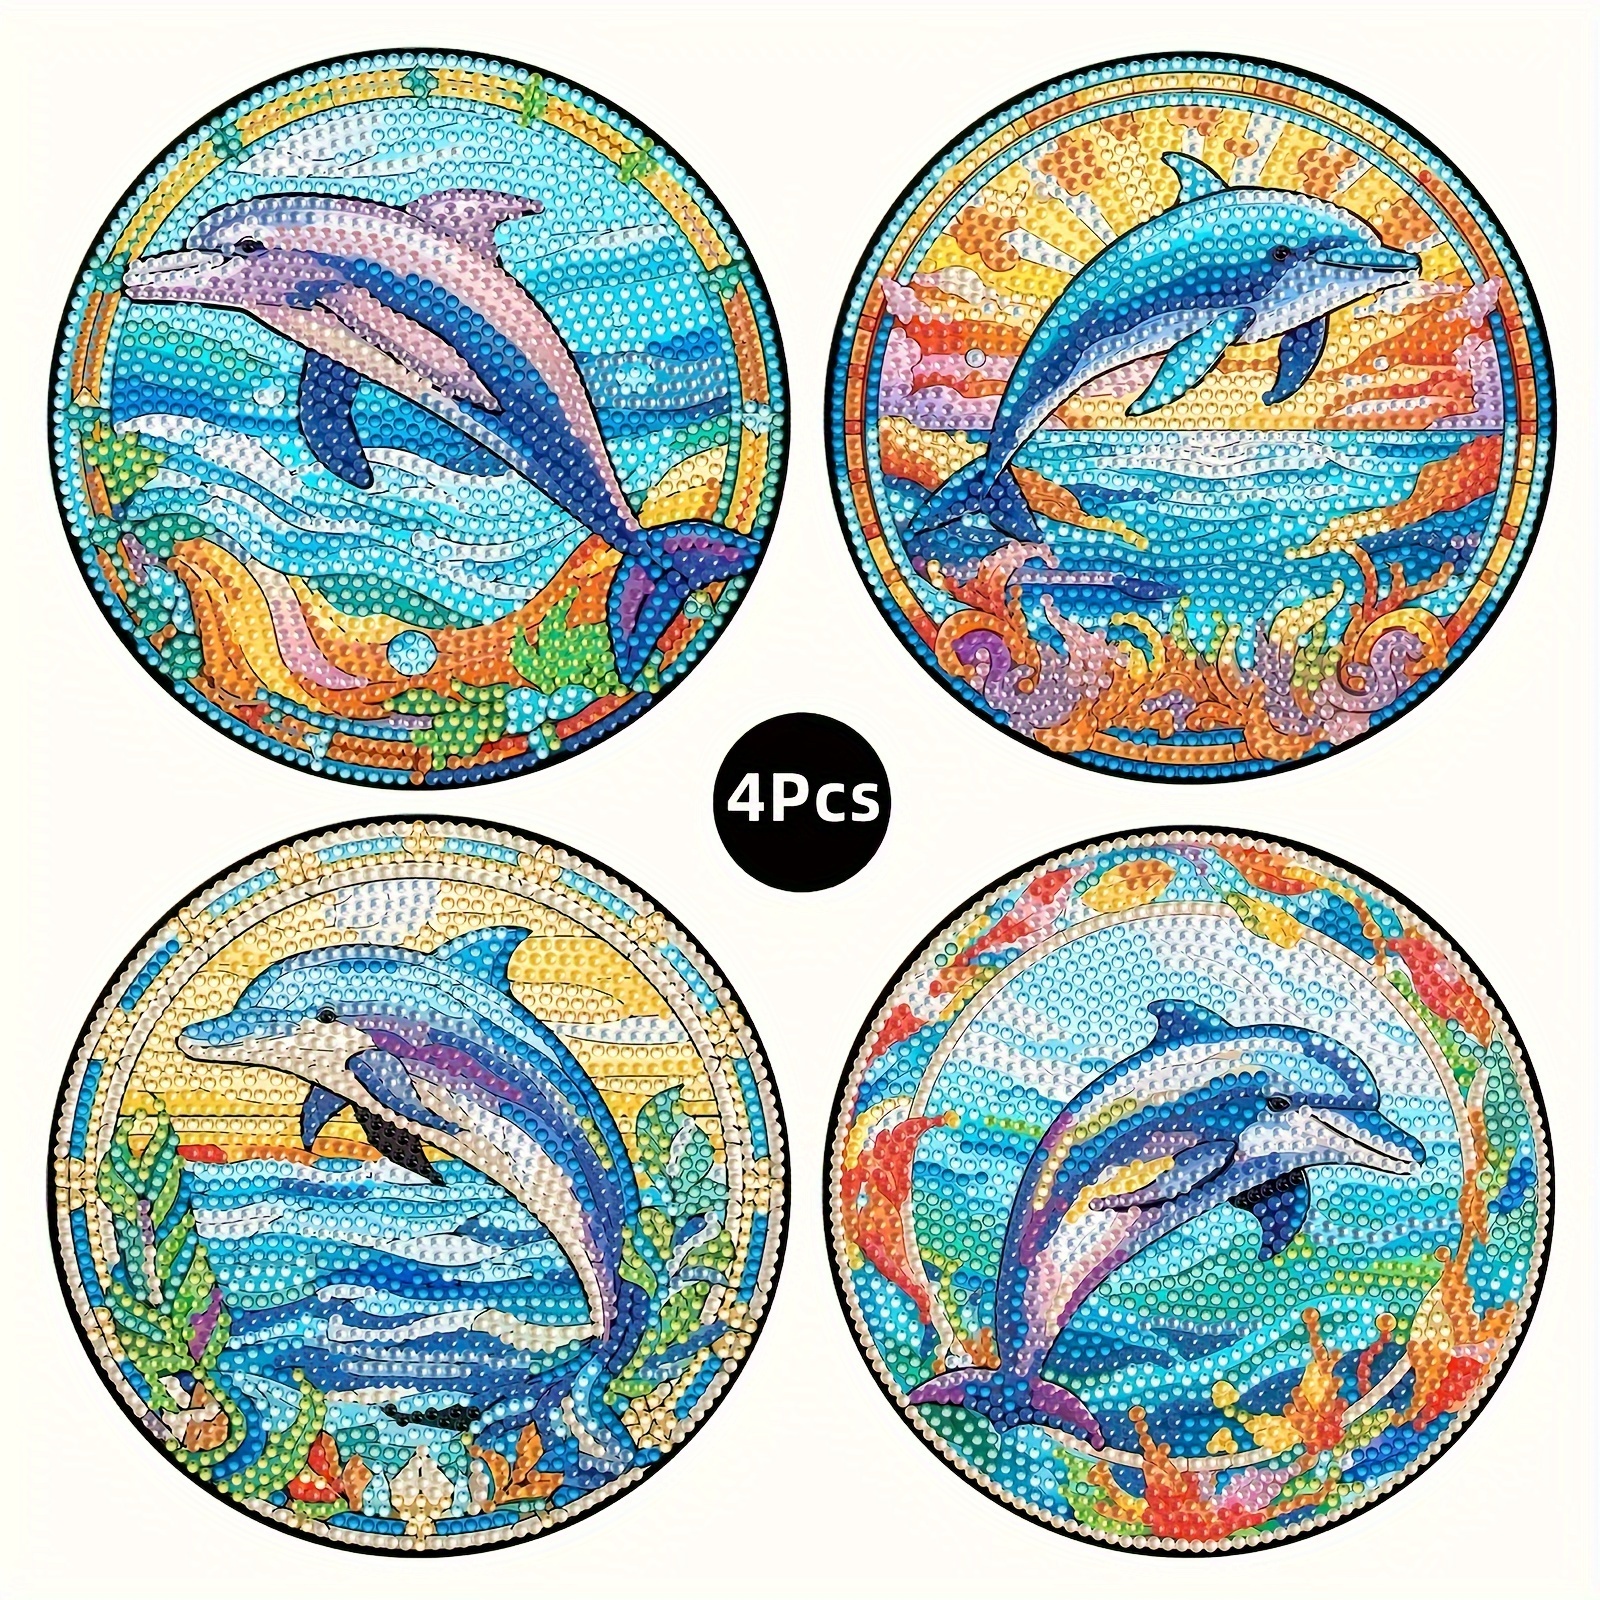 

4-piece Dolphin Diamond Art Placemat Set - Diy Mosaic Craft Kit With Full Round Crystal Gems, Heat-resistant Wooden Table Mats For Kitchen Decor & Handmade Gifts